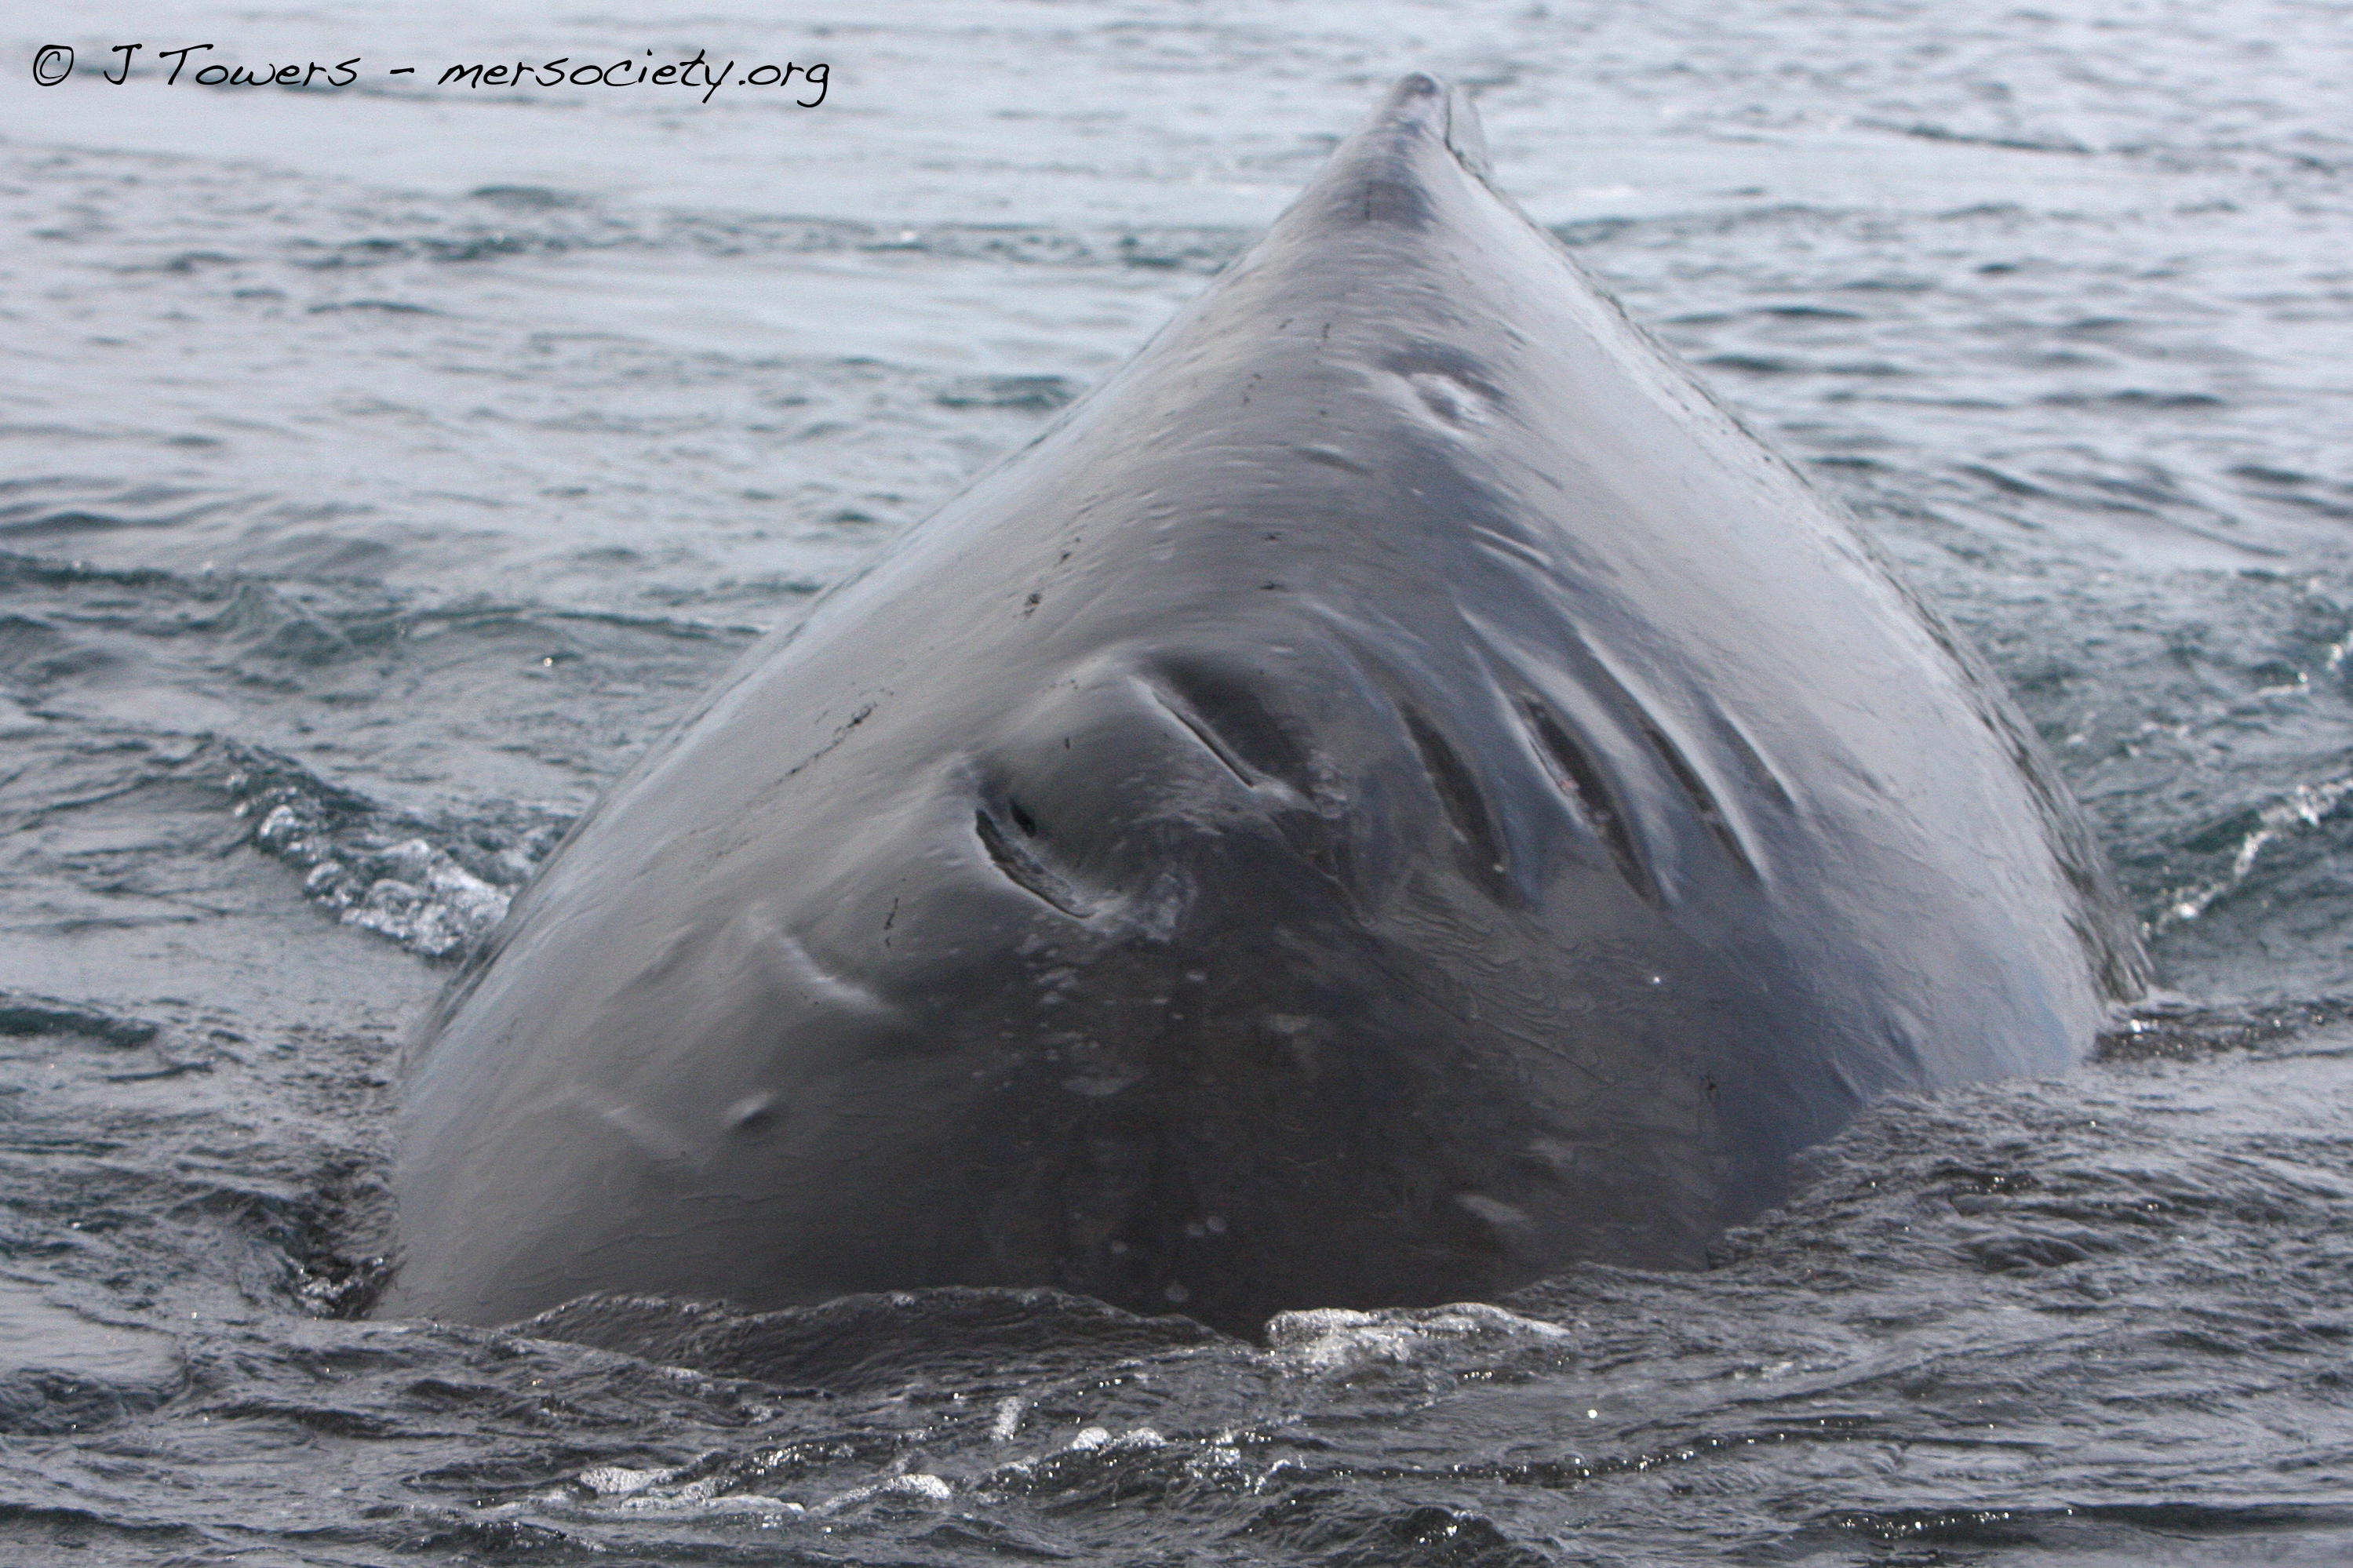 Humpback whale "Slash" (BCY0177), an adult female who has had at least two calves, with scars from a collision with a large vessel. (Photo by J. Towers, MERS)